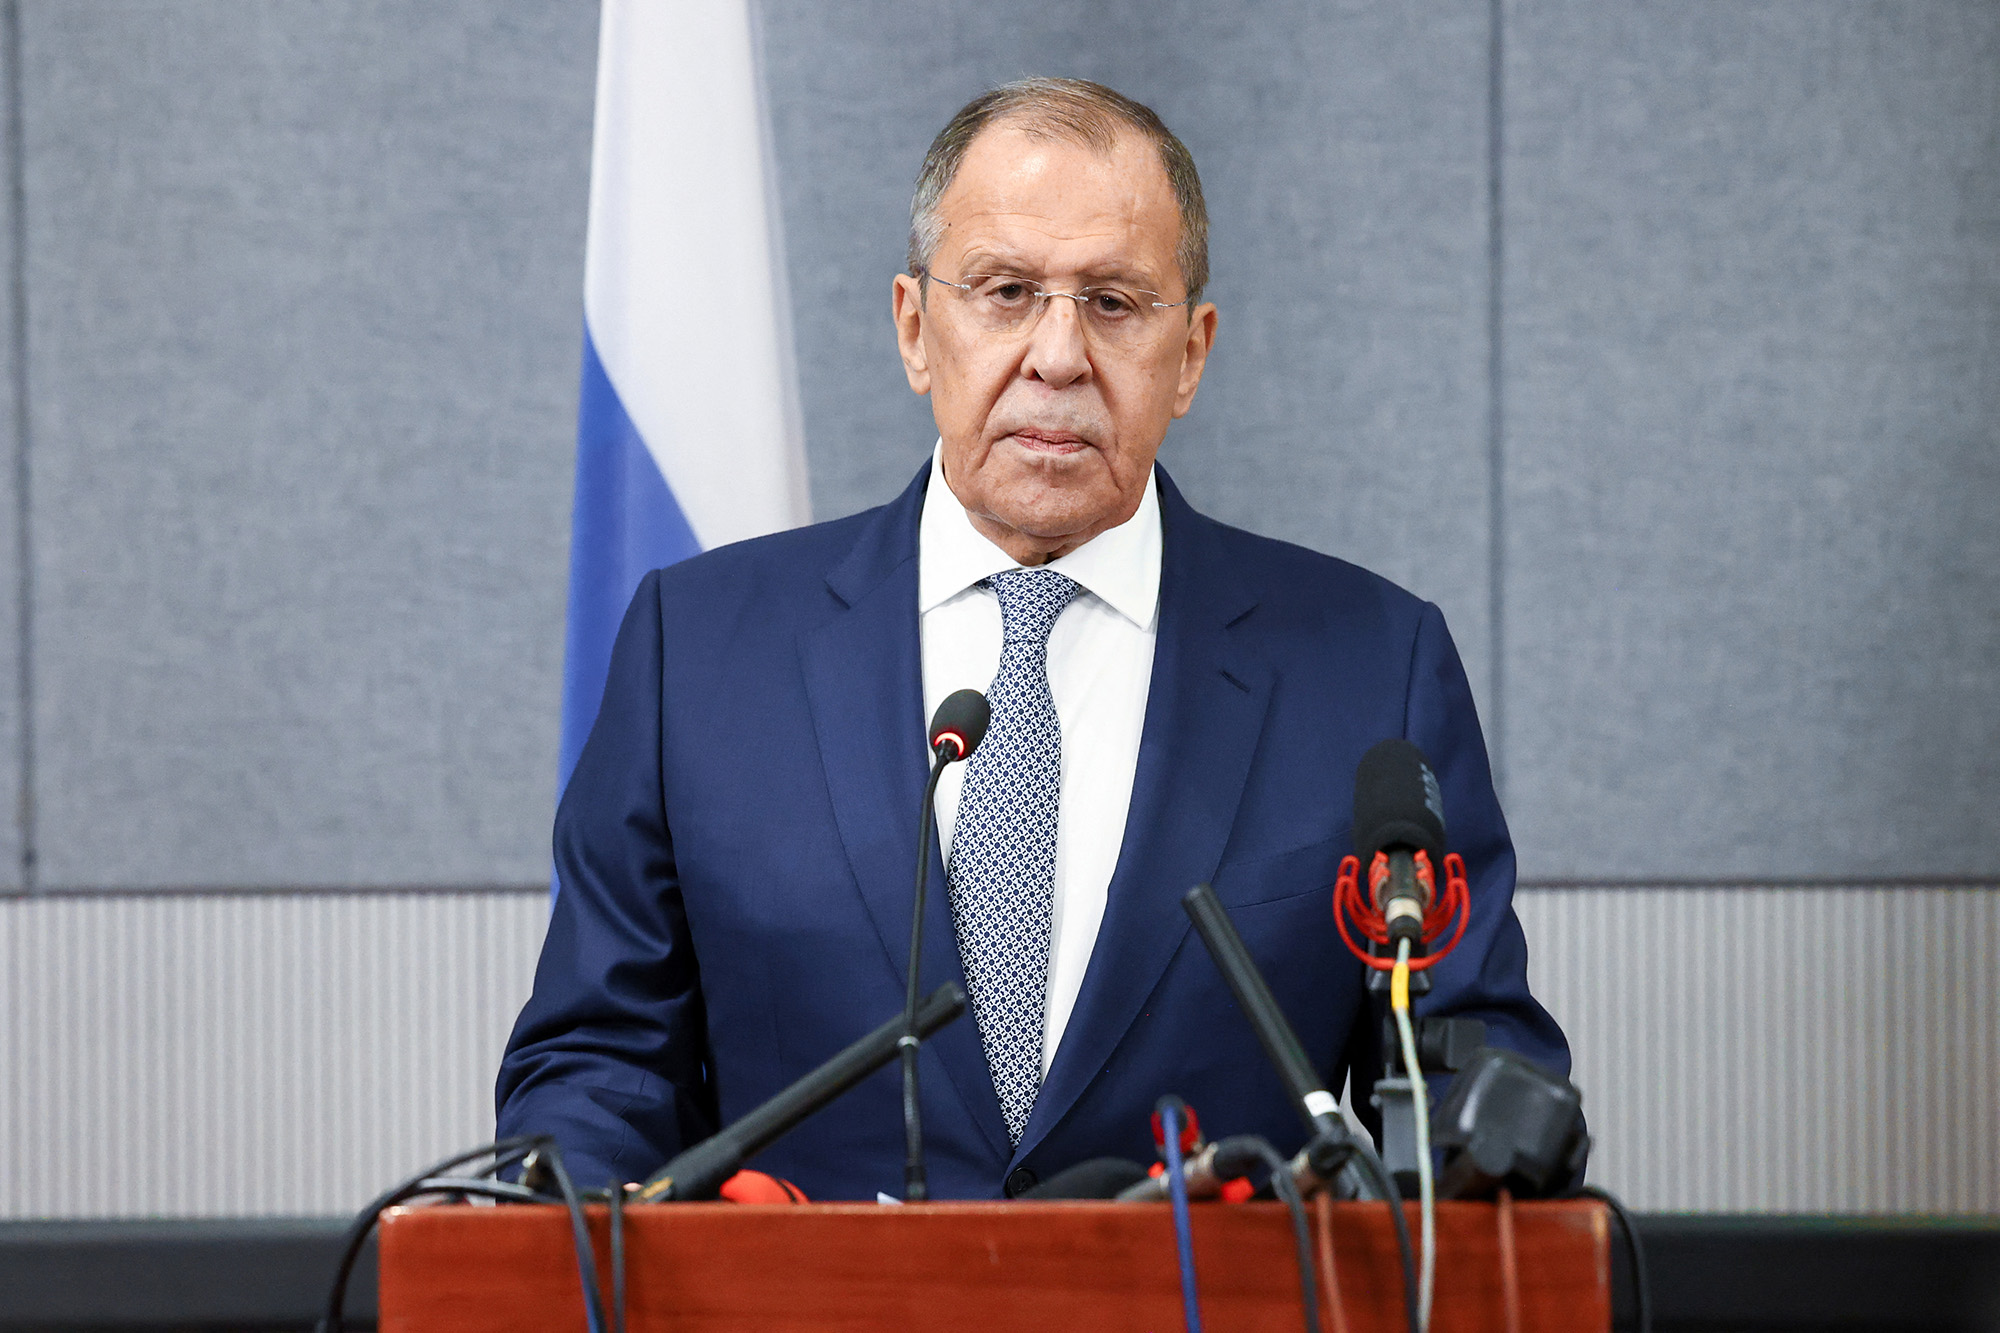 Russian Foreign Minister Sergey Lavrov attends a news conference in Bujumbura, Burundi, on May 30.